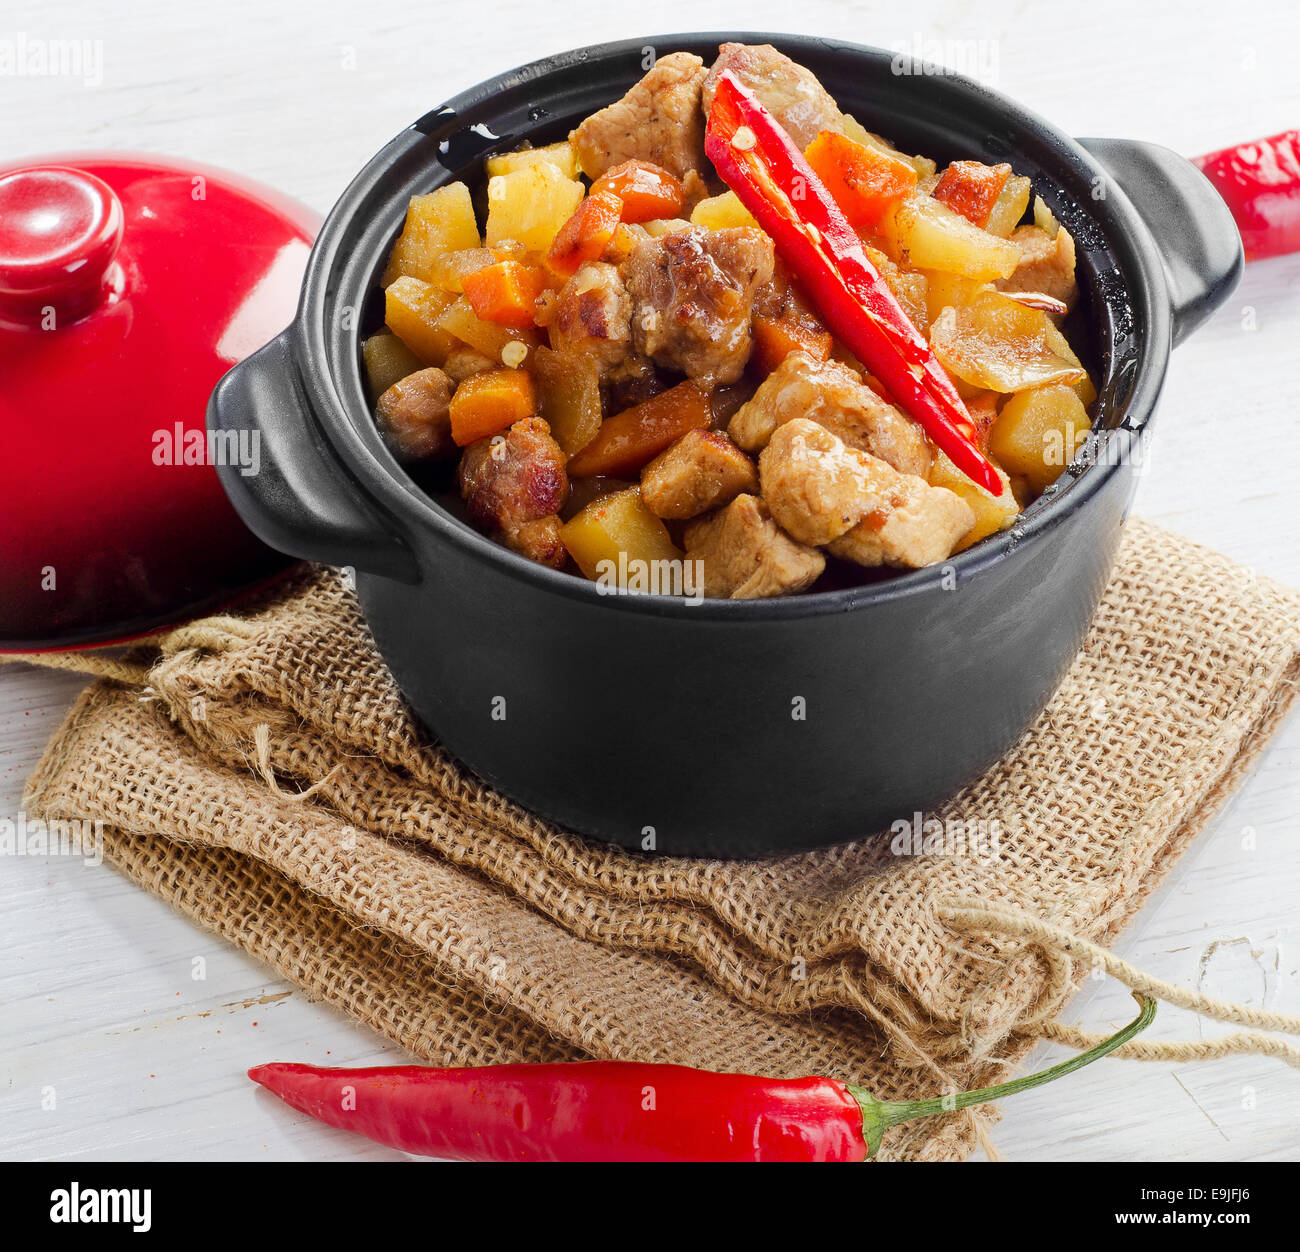 Vegetable and meat stew with chili peppers. Stock Photo